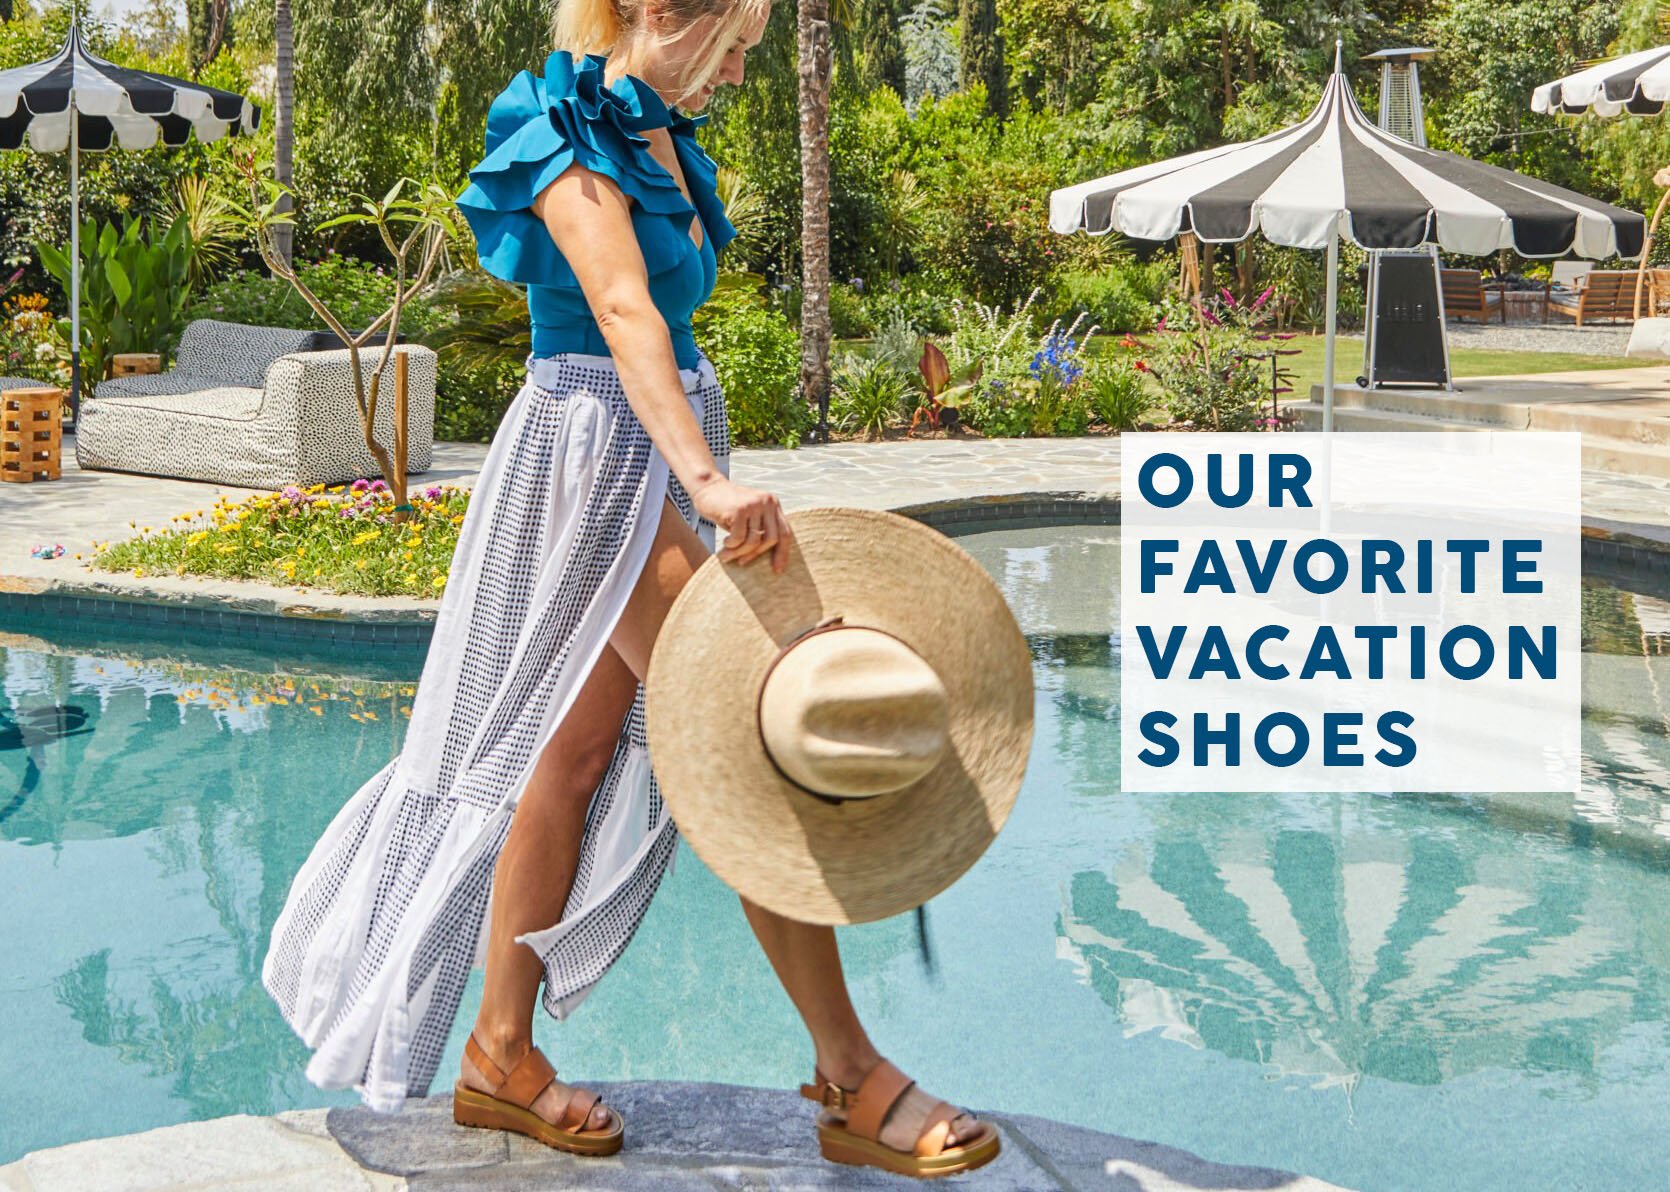 The 6 Types Of Comfortable And Cute Shoes We Want To Wear On Vacation